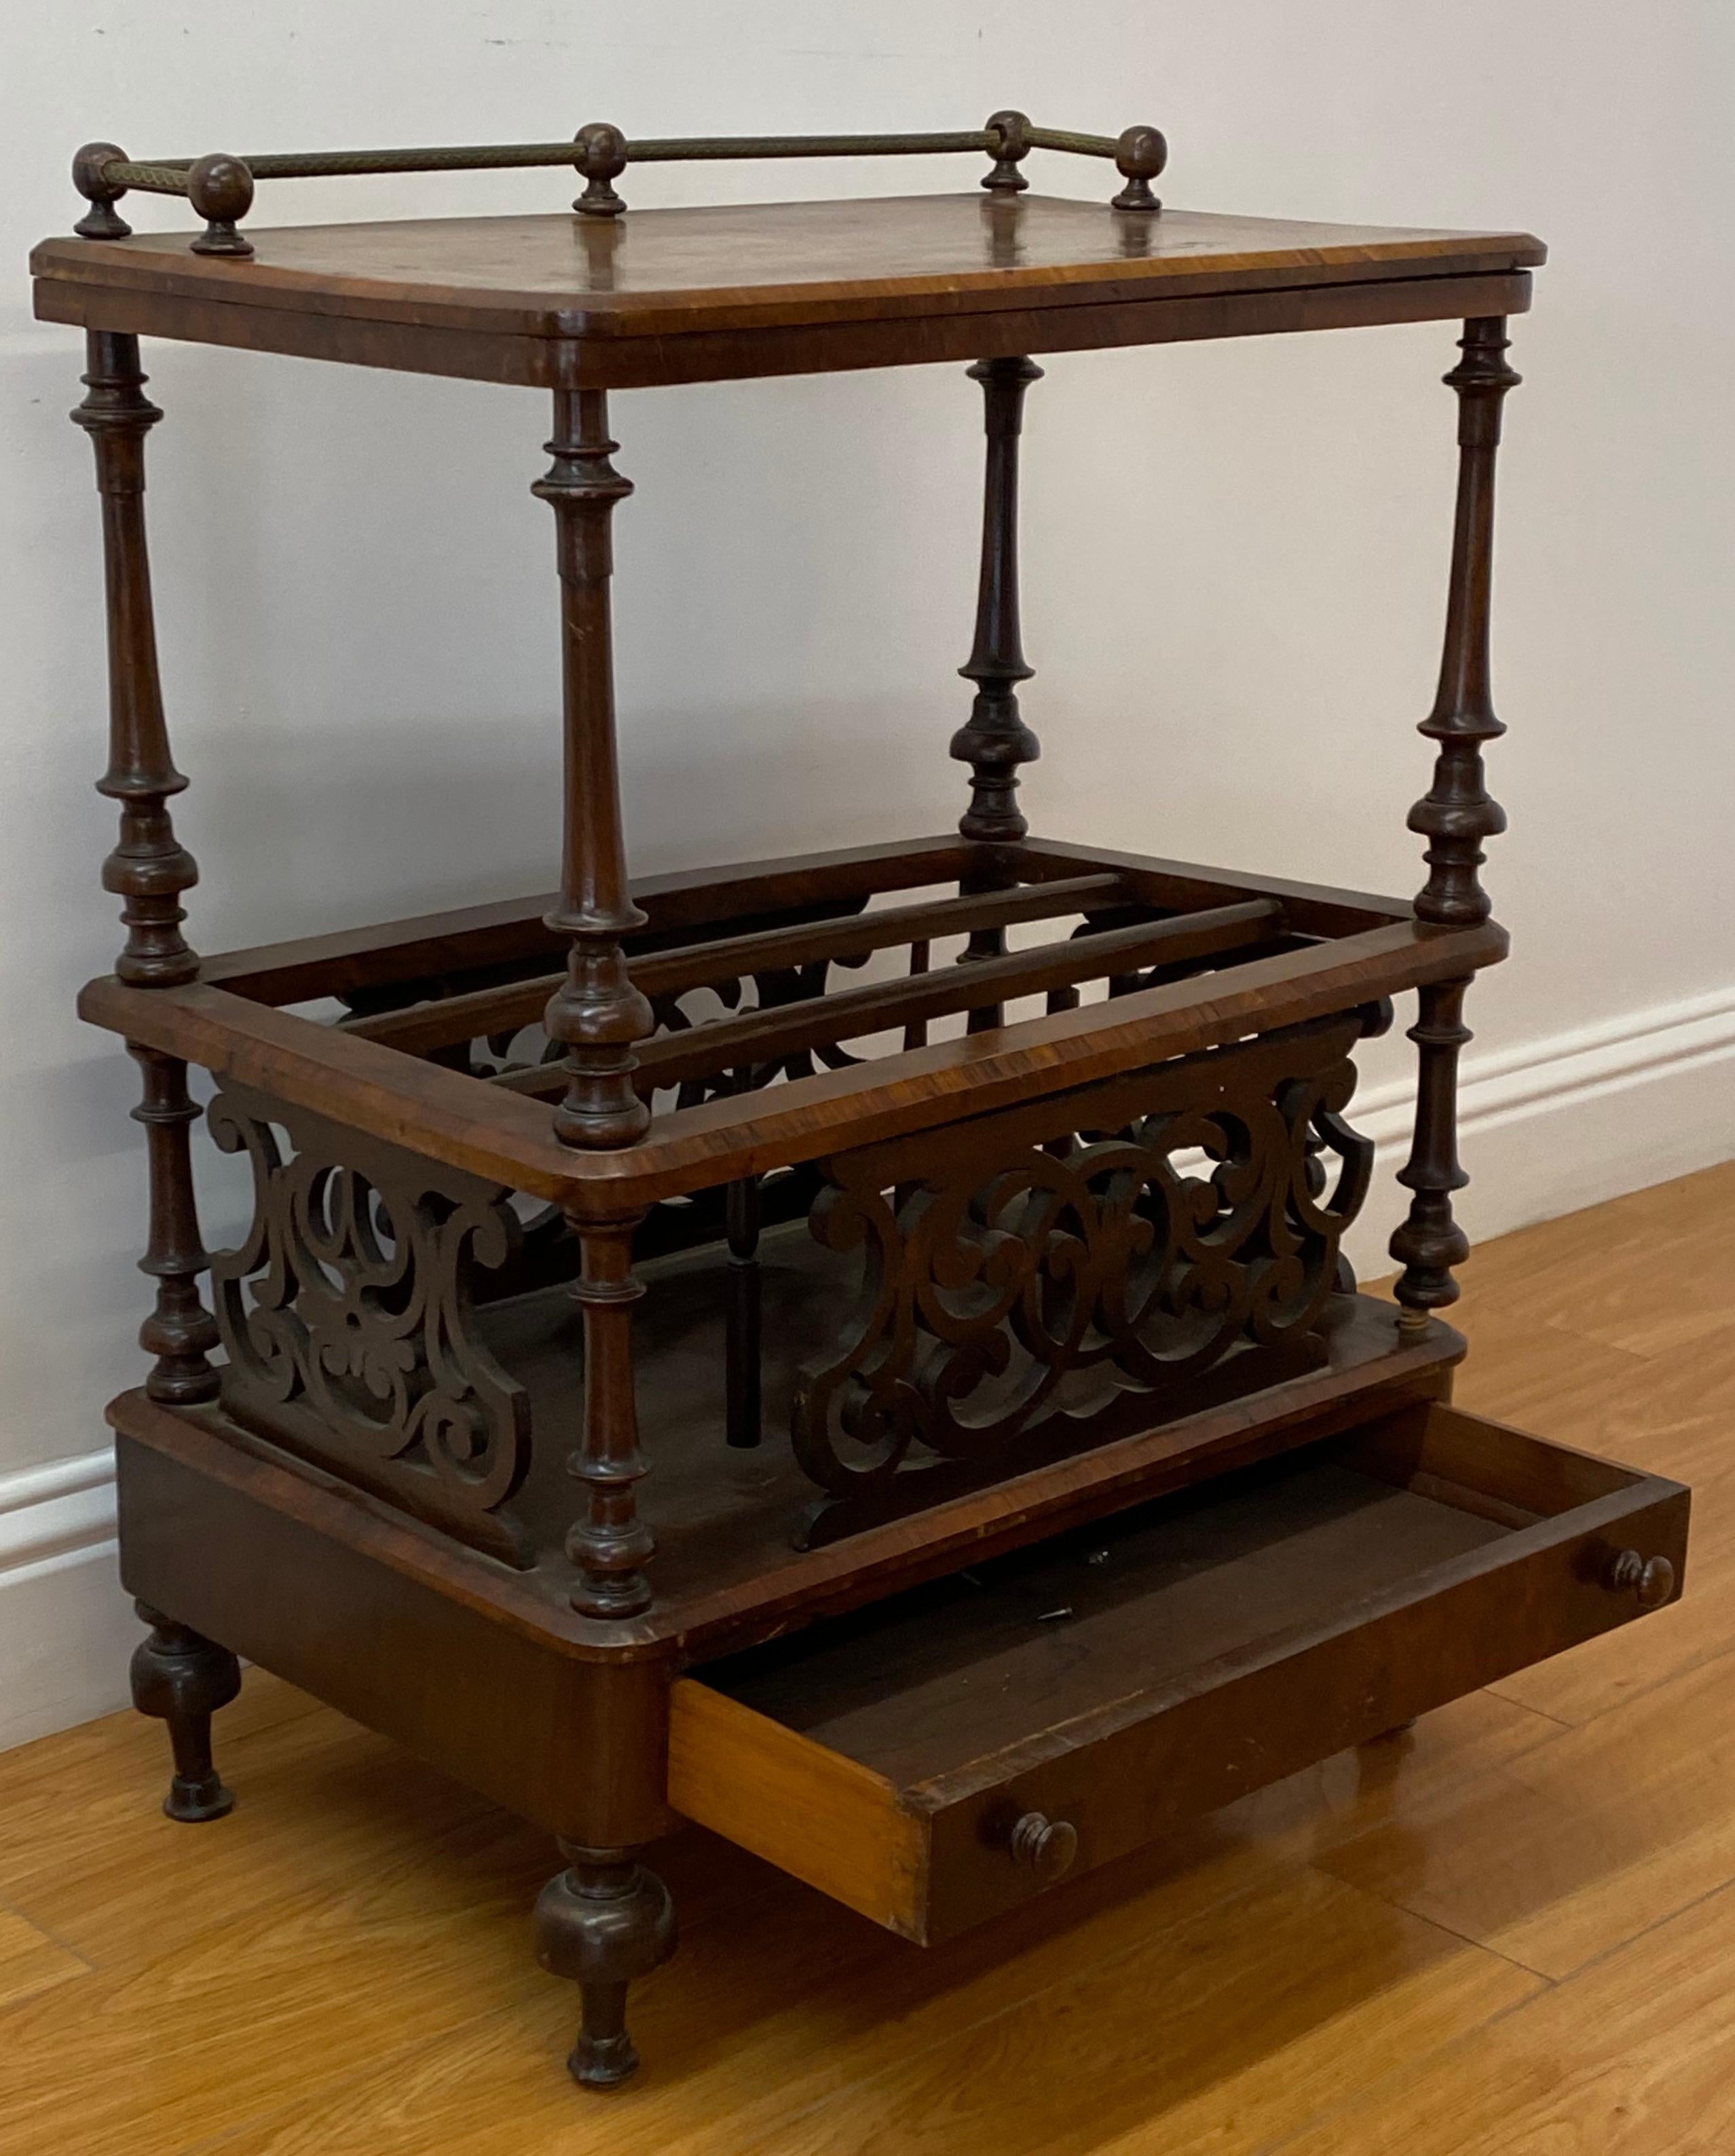 19th century walnut inlay magazine table w/ drawer

Hand carved custom made magazine holder with single drawer below and table on top

Beautiful burl walnut veneer over a rosewood frame and a brass backsplash at the top

Measures: 23